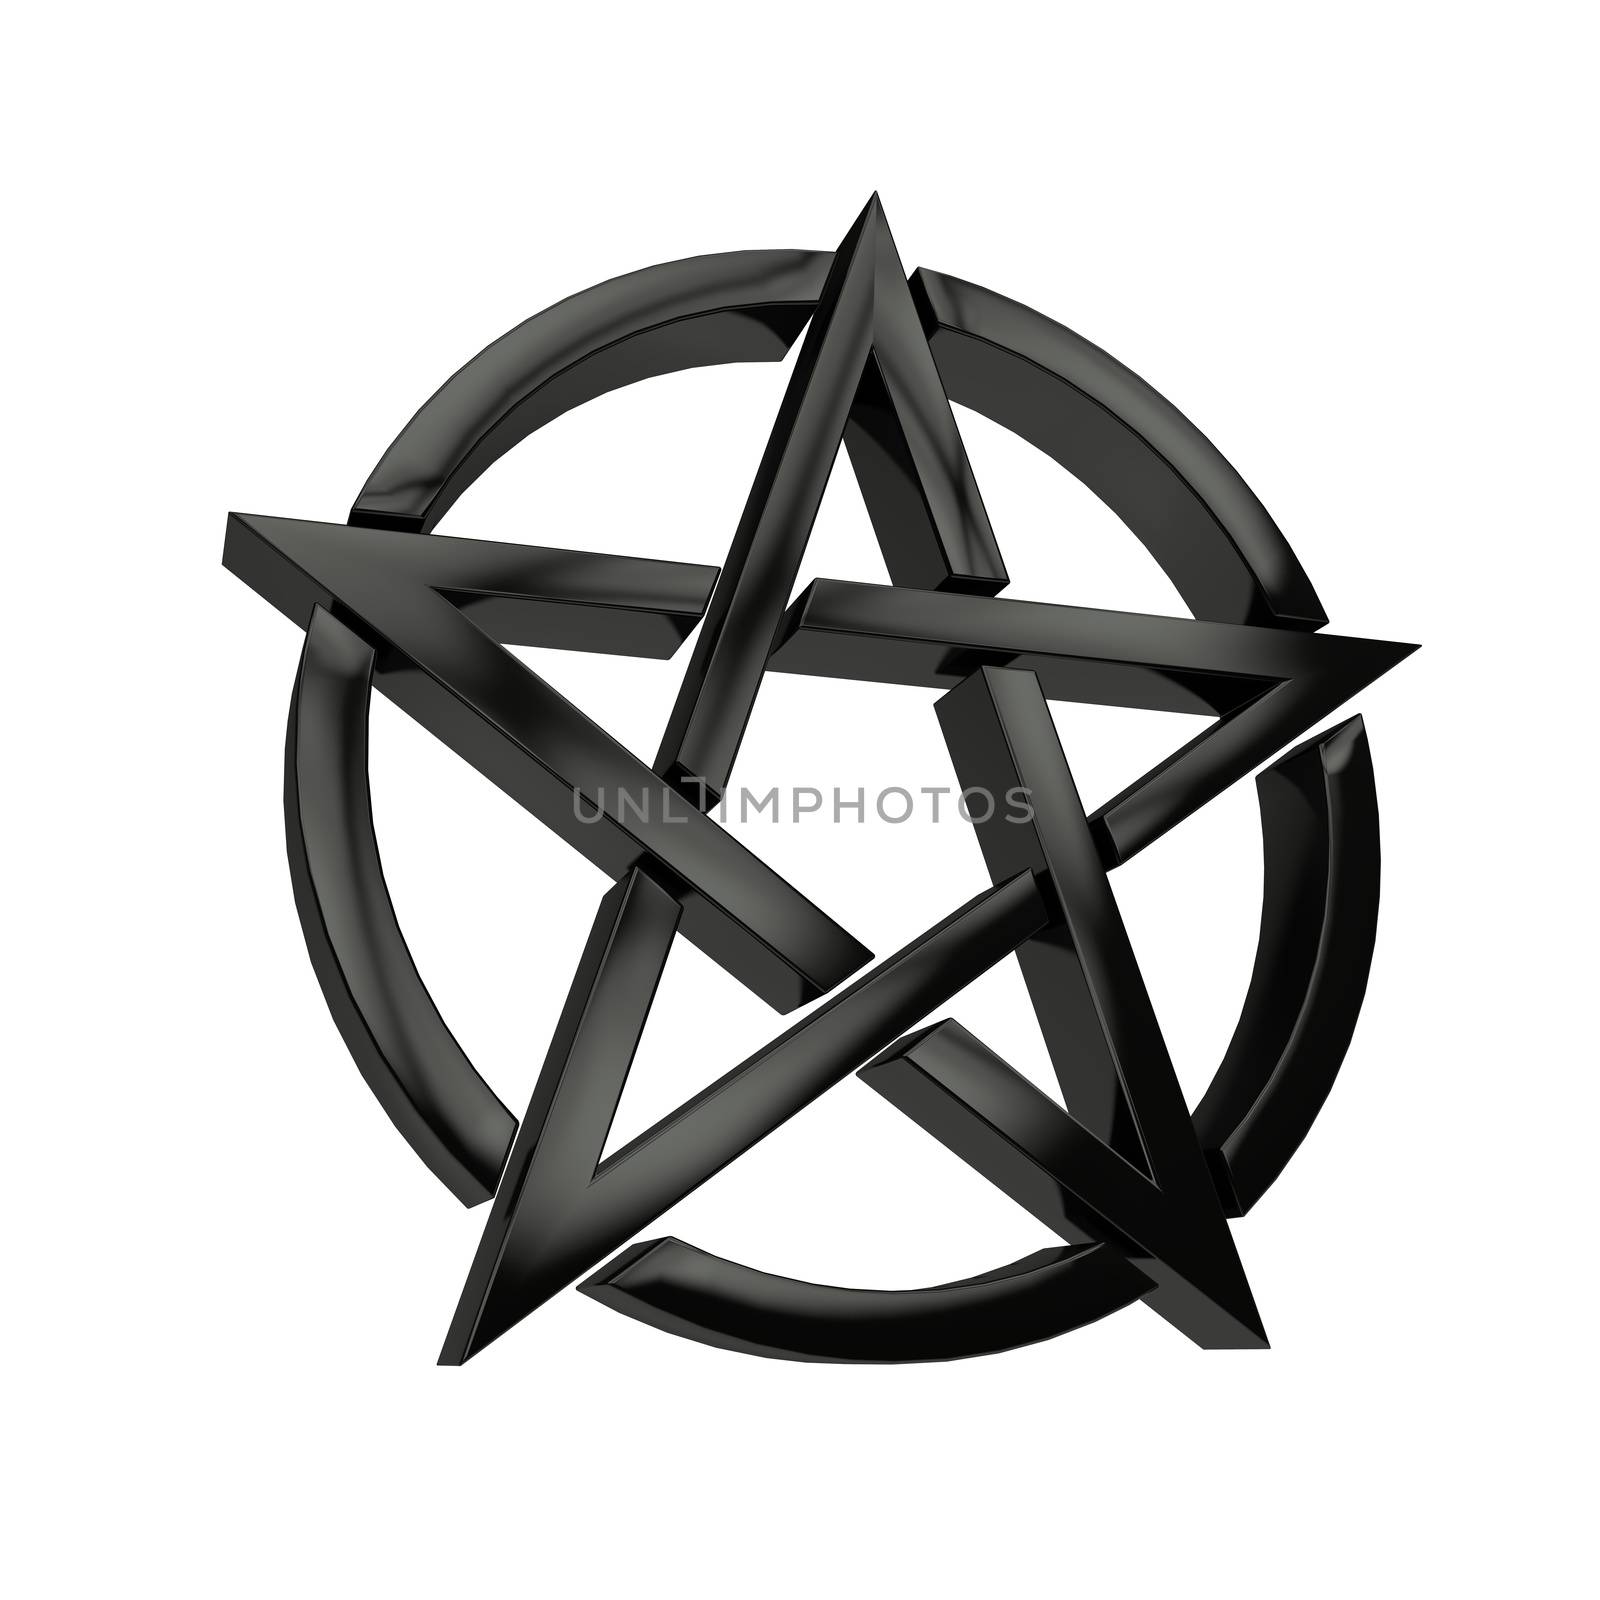 A pentagram is among other things a label for a form of the five-pointed star